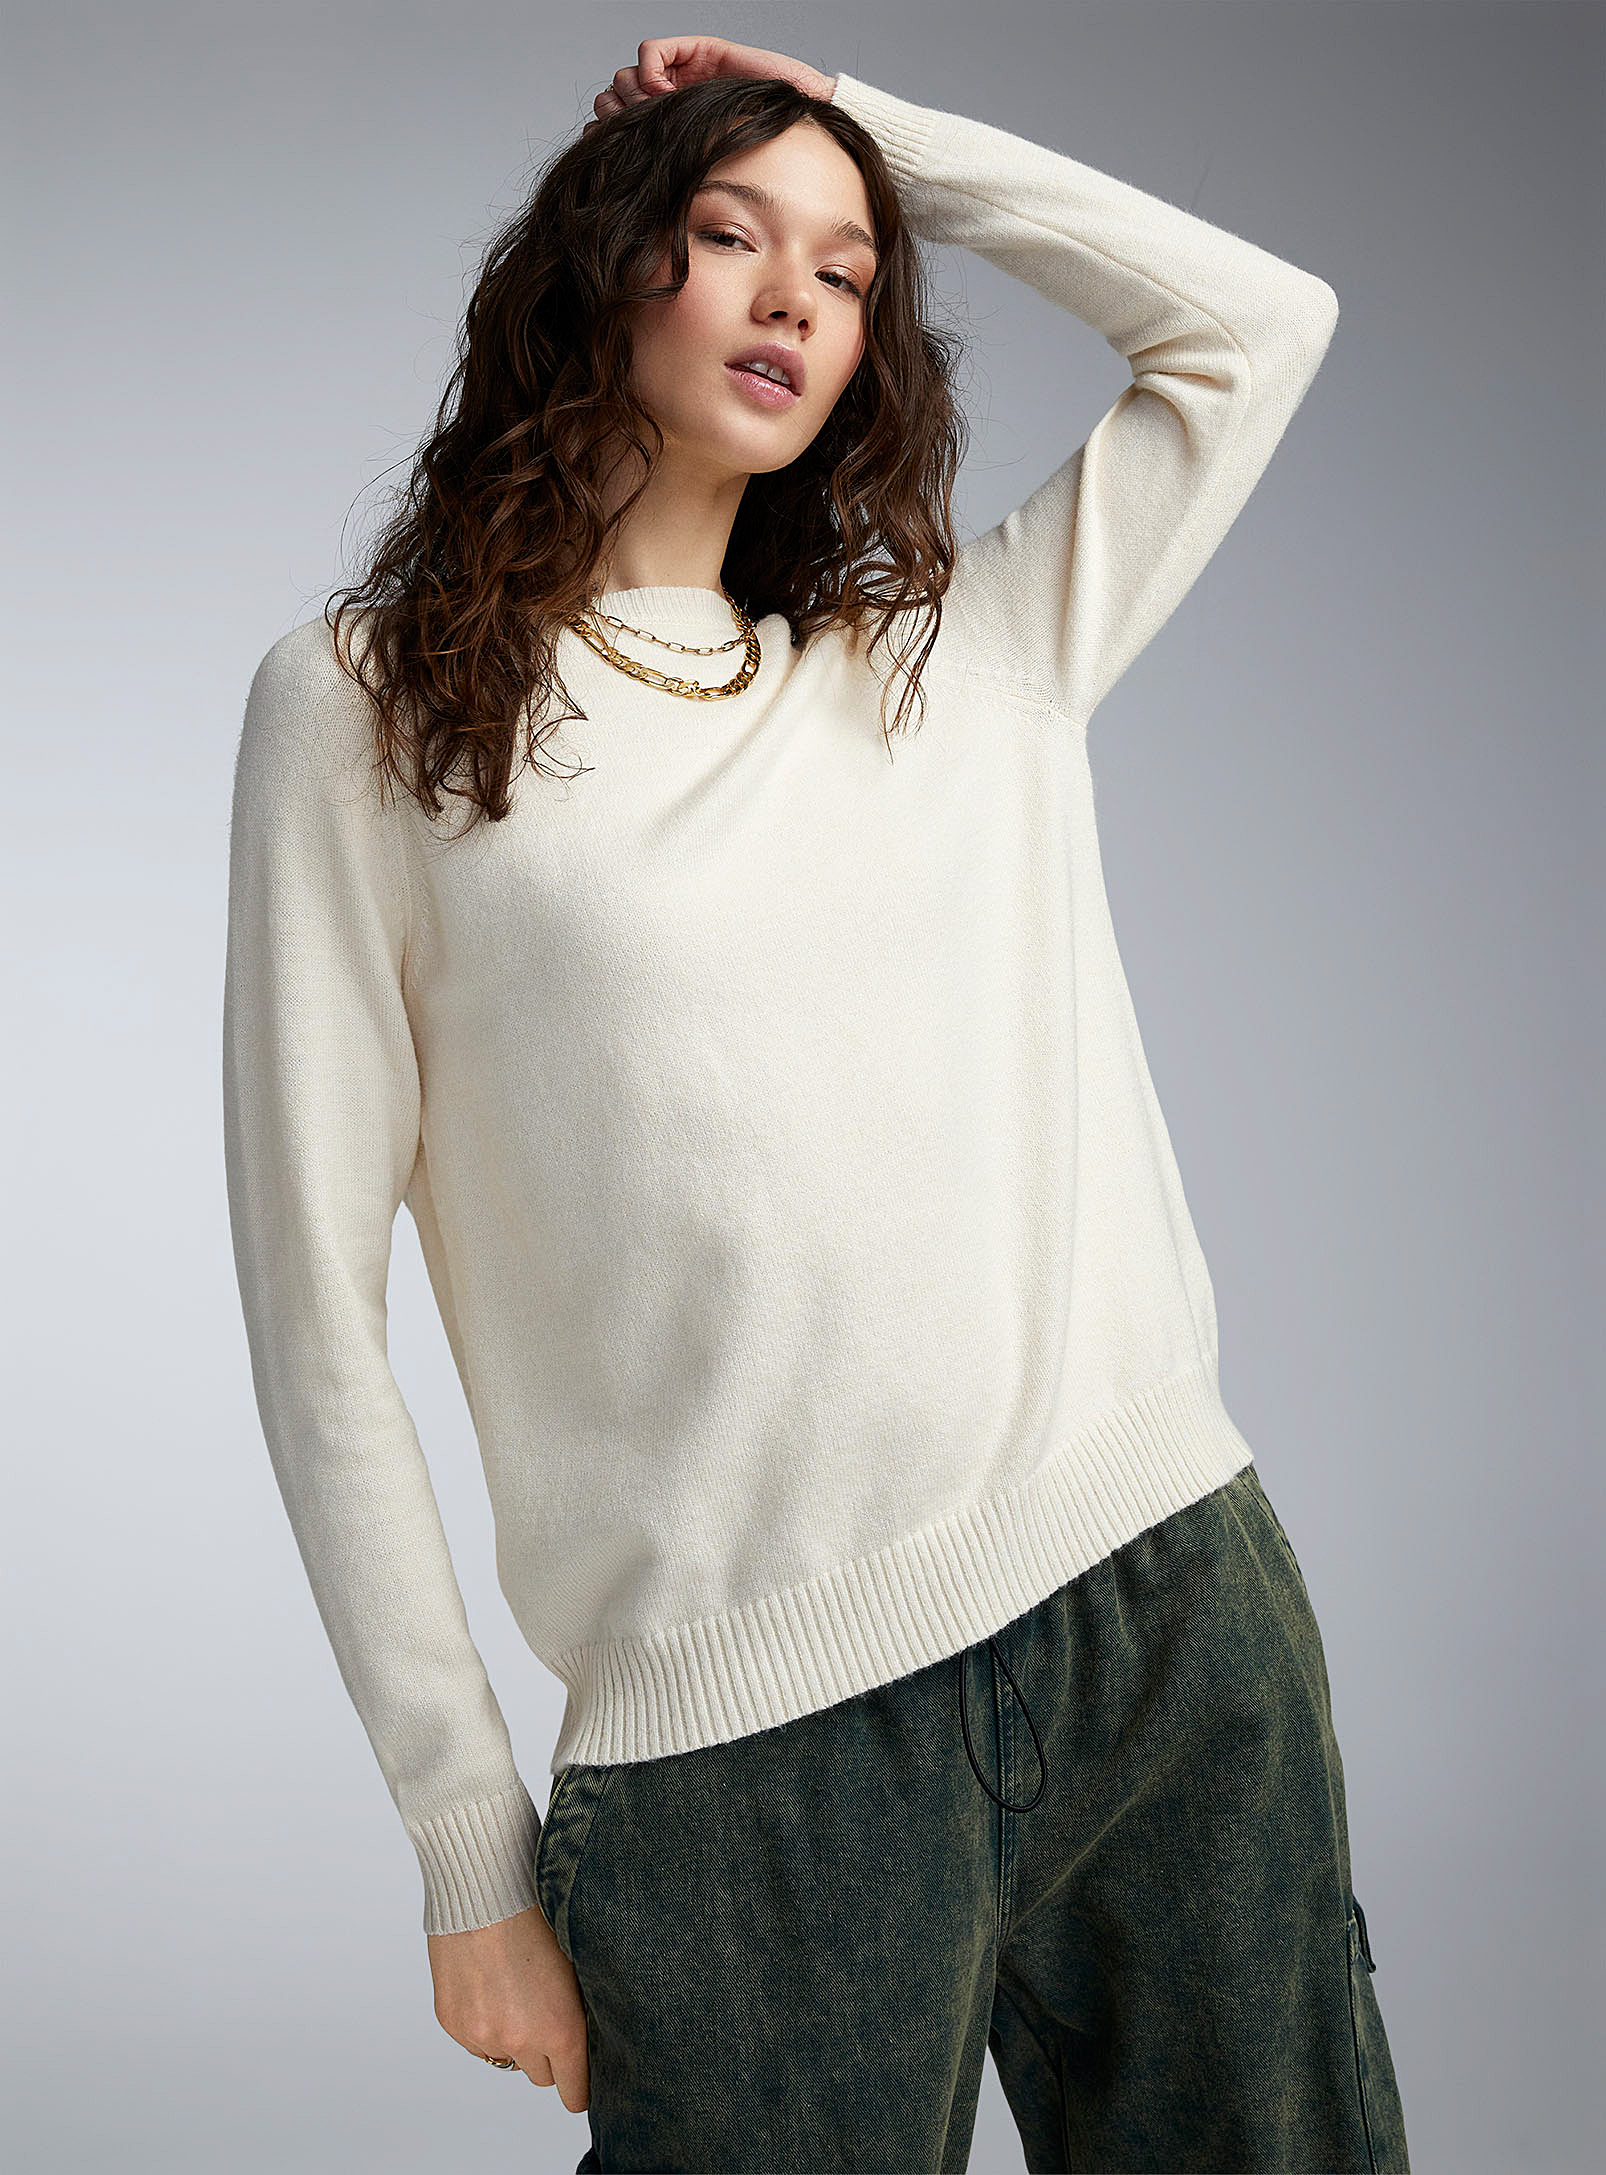 Only Fine Knit Raglan Sweater In Ivory White